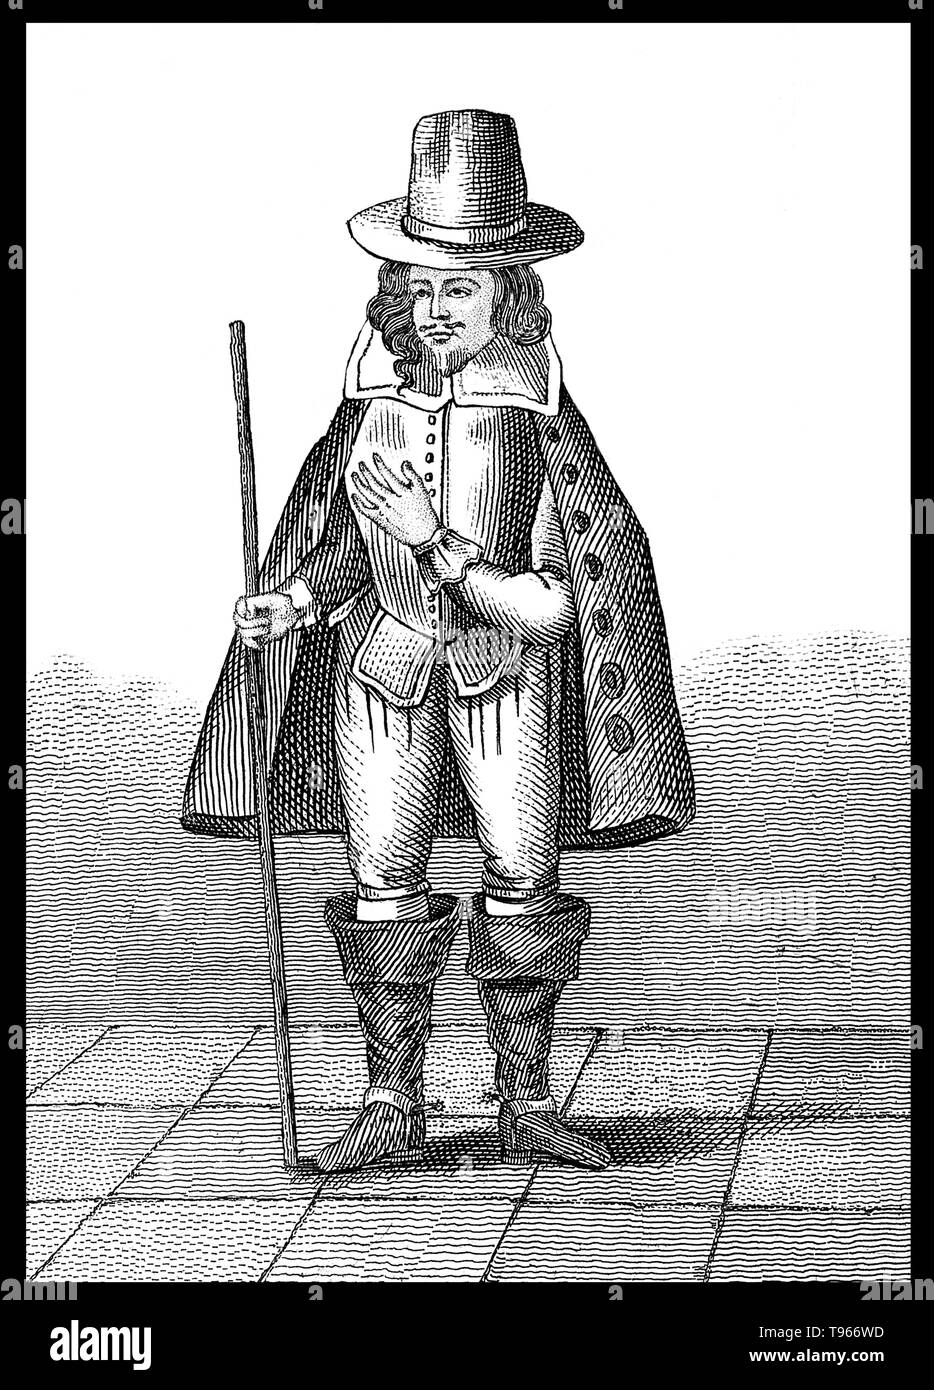 Matthew Hopkins (1620 - August 12, 1647) was an English witchhunter. He claimed to hold the office of Witchfinder General, although that title was never bestowed by Parliament. His witch-finding career began in March 1644 and lasted until his retirement in 1647. Hopkins is believed to have been responsible for the deaths of 300 women.  He died in 1647, probably of pleural tuberculosis, at the age of 27. No artist credited. Stock Photo